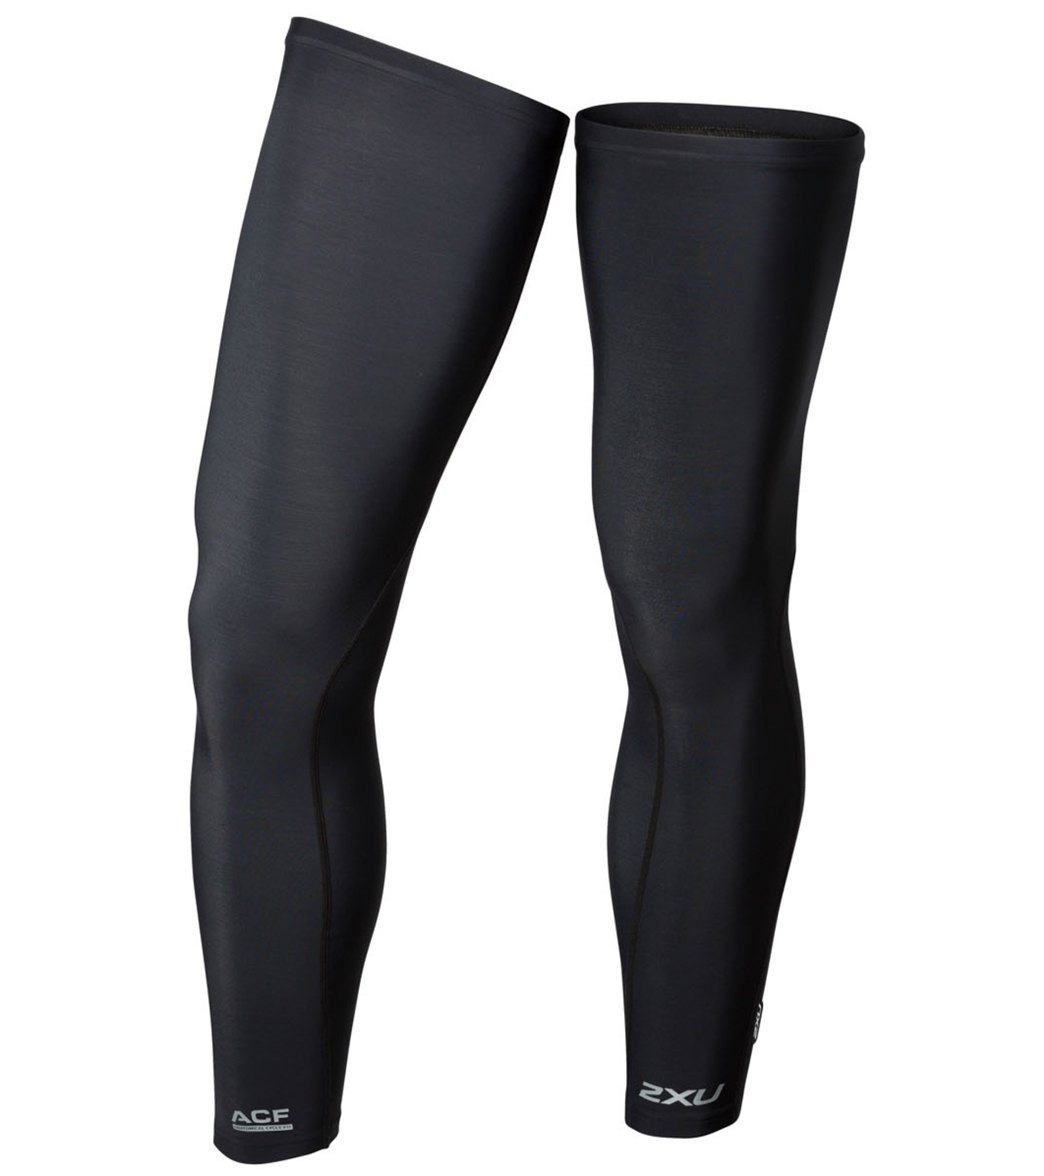 2XU Cycle Thermal Leg Warmers at SwimOutlet.com - Free Shipping